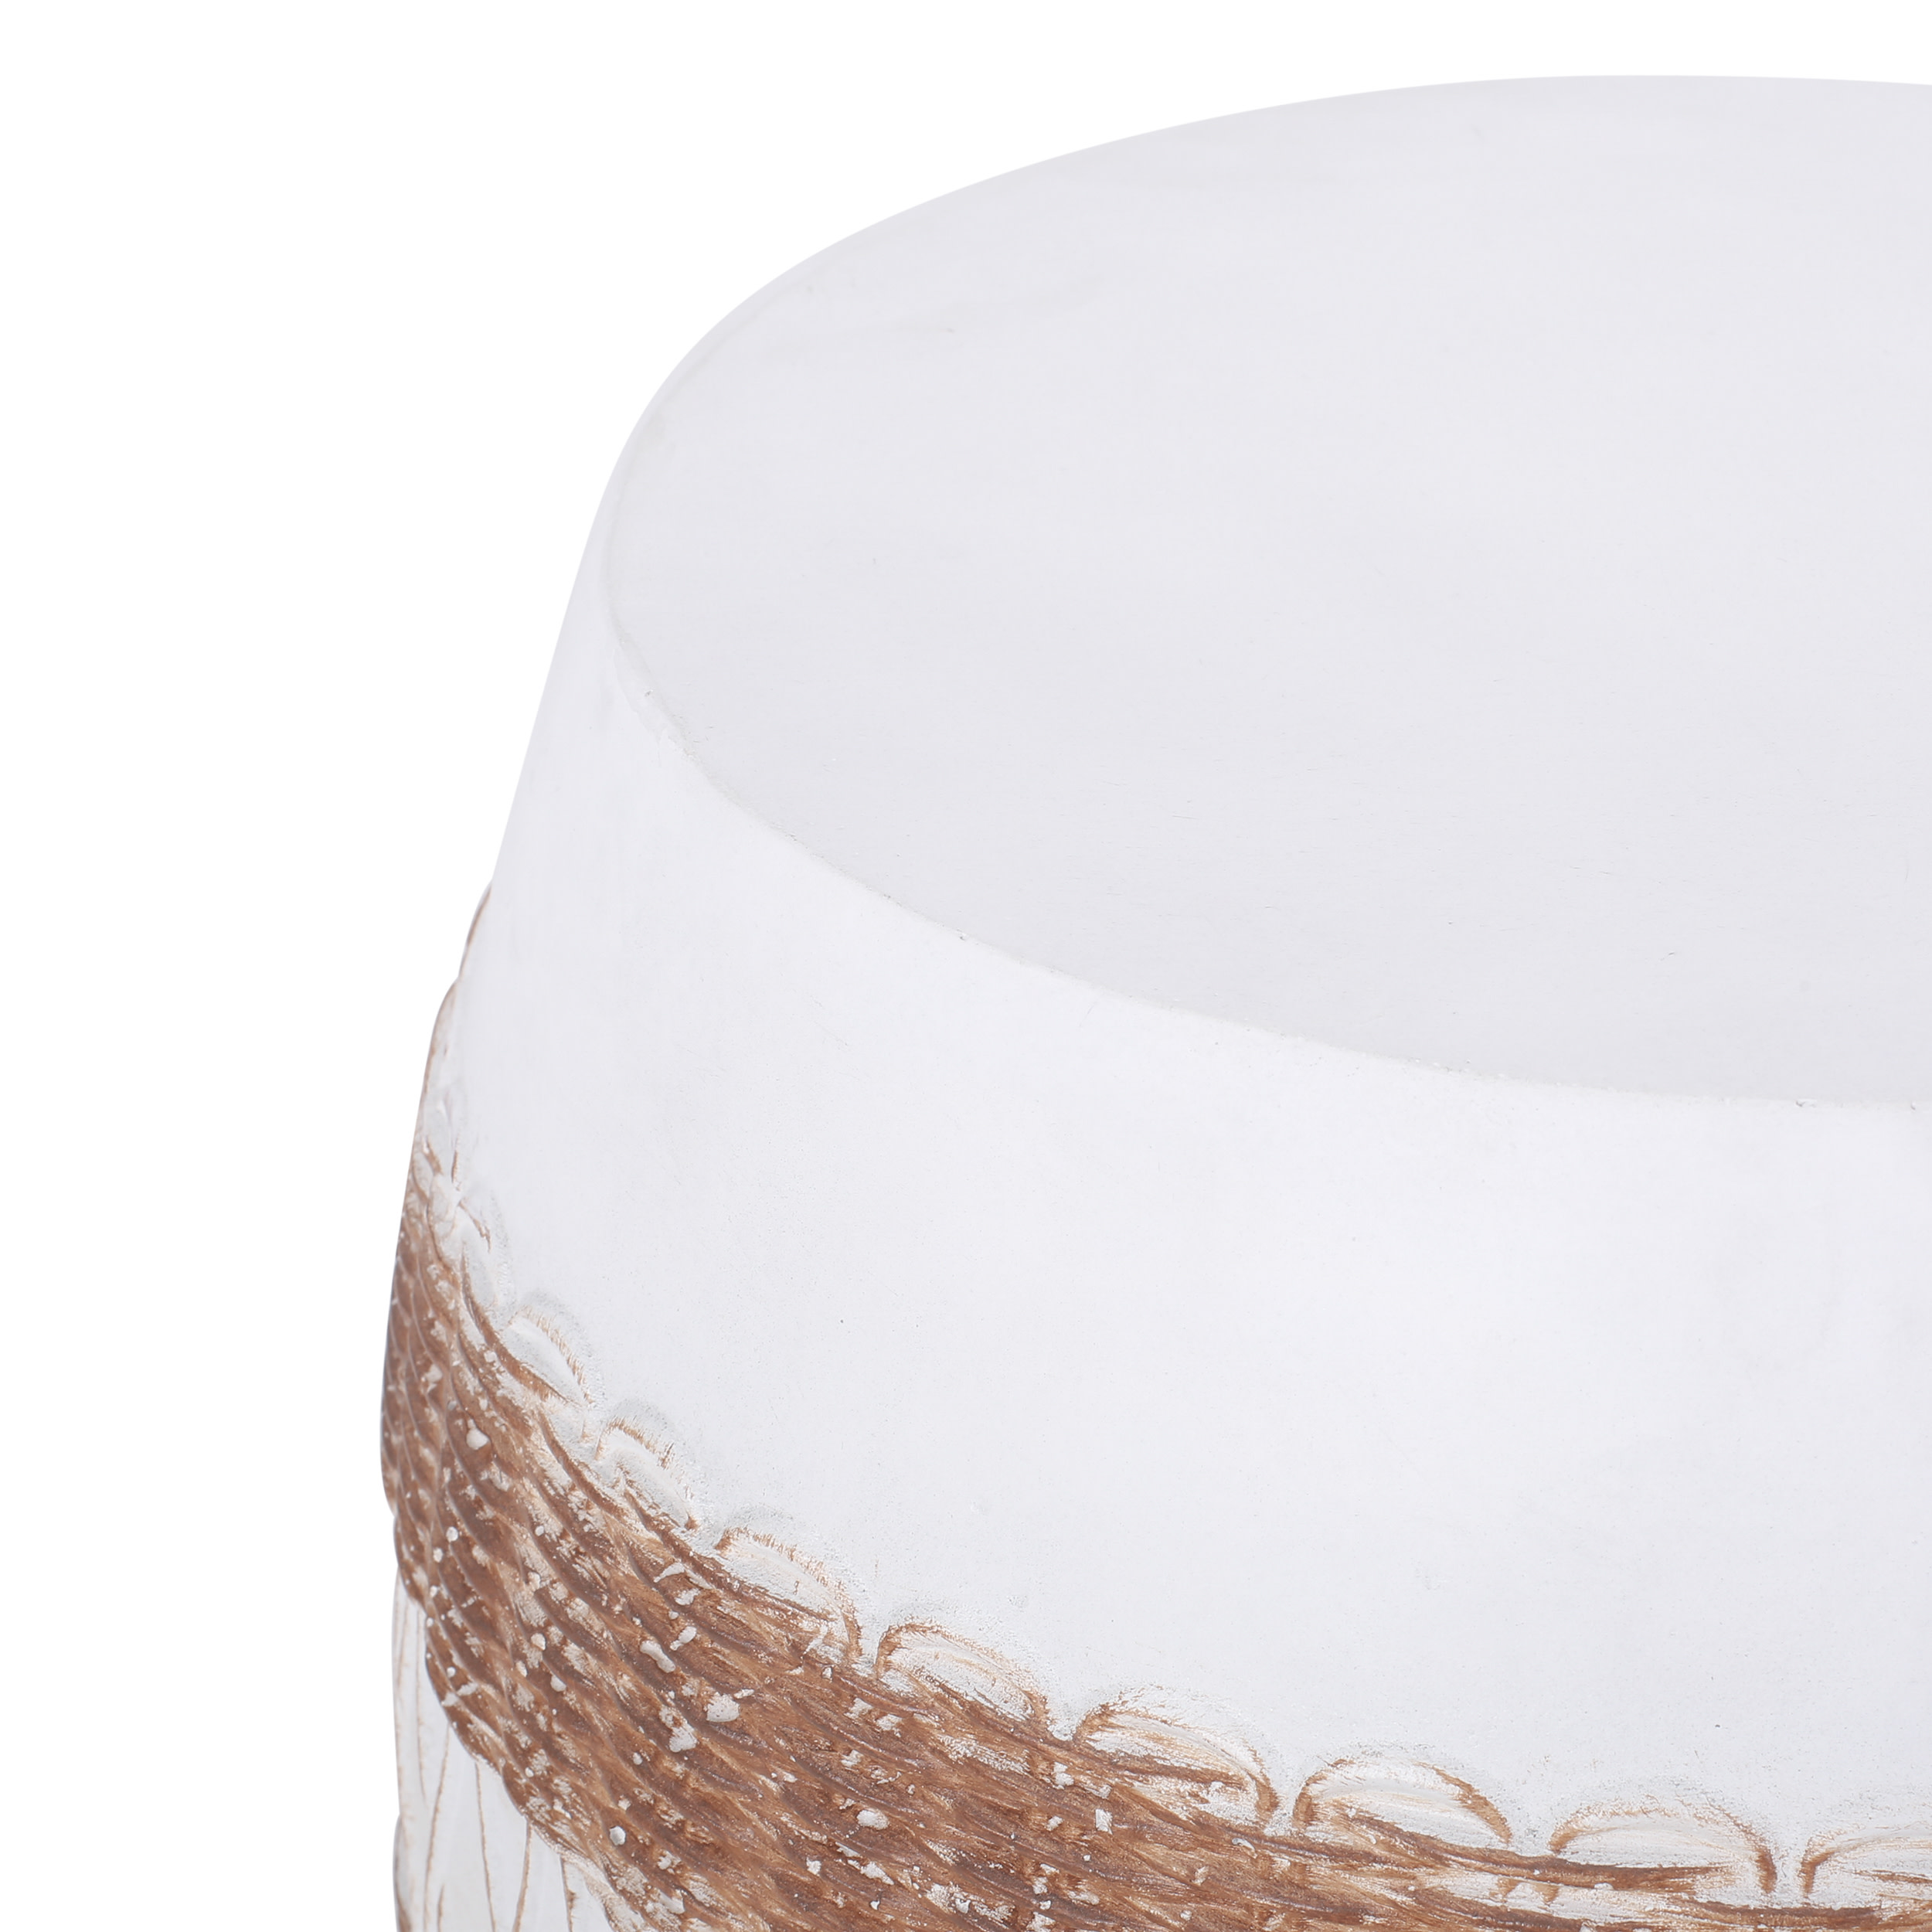 Durette Lightweight Concrete Outdoor Side Table, White and Brown - image 5 of 6